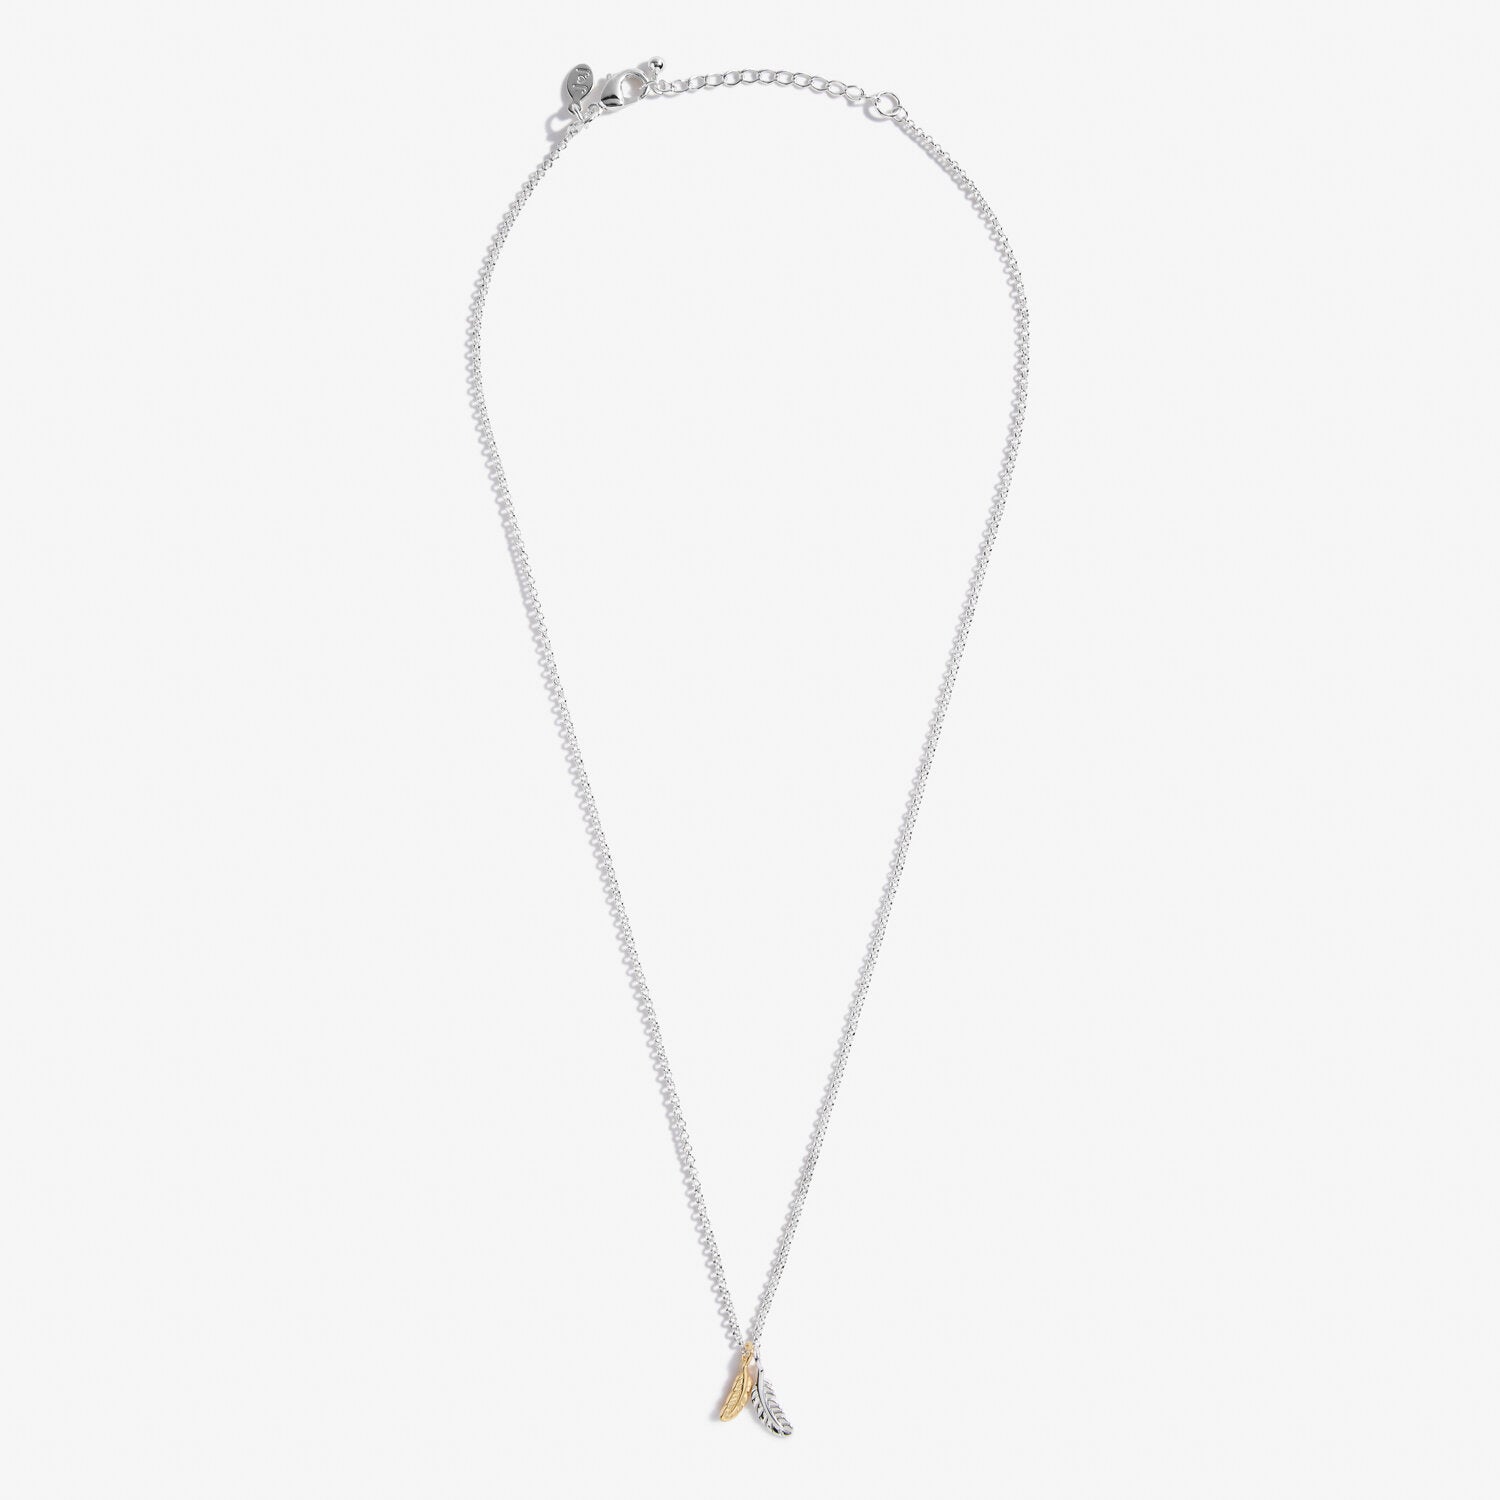 Joma Jewellery A Little Feathers Appear When Loved Ones Are Near Necklace